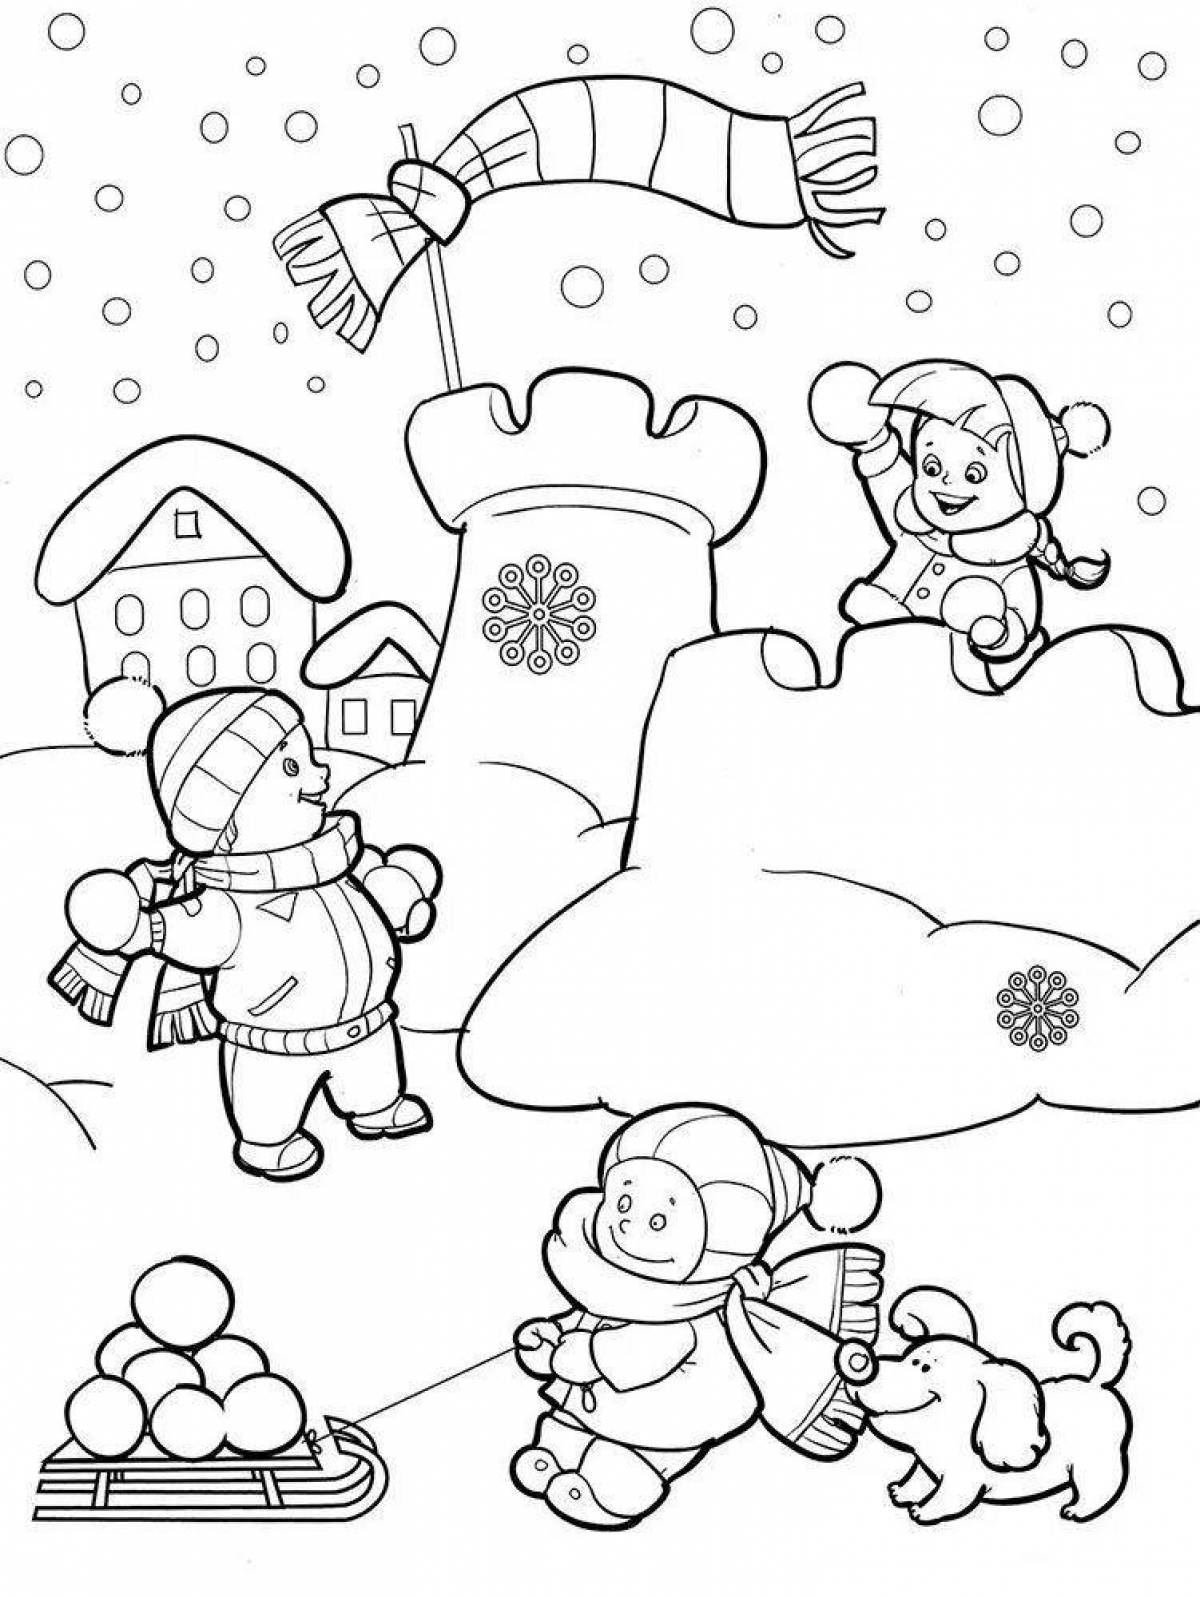 Luxury winter fun coloring page